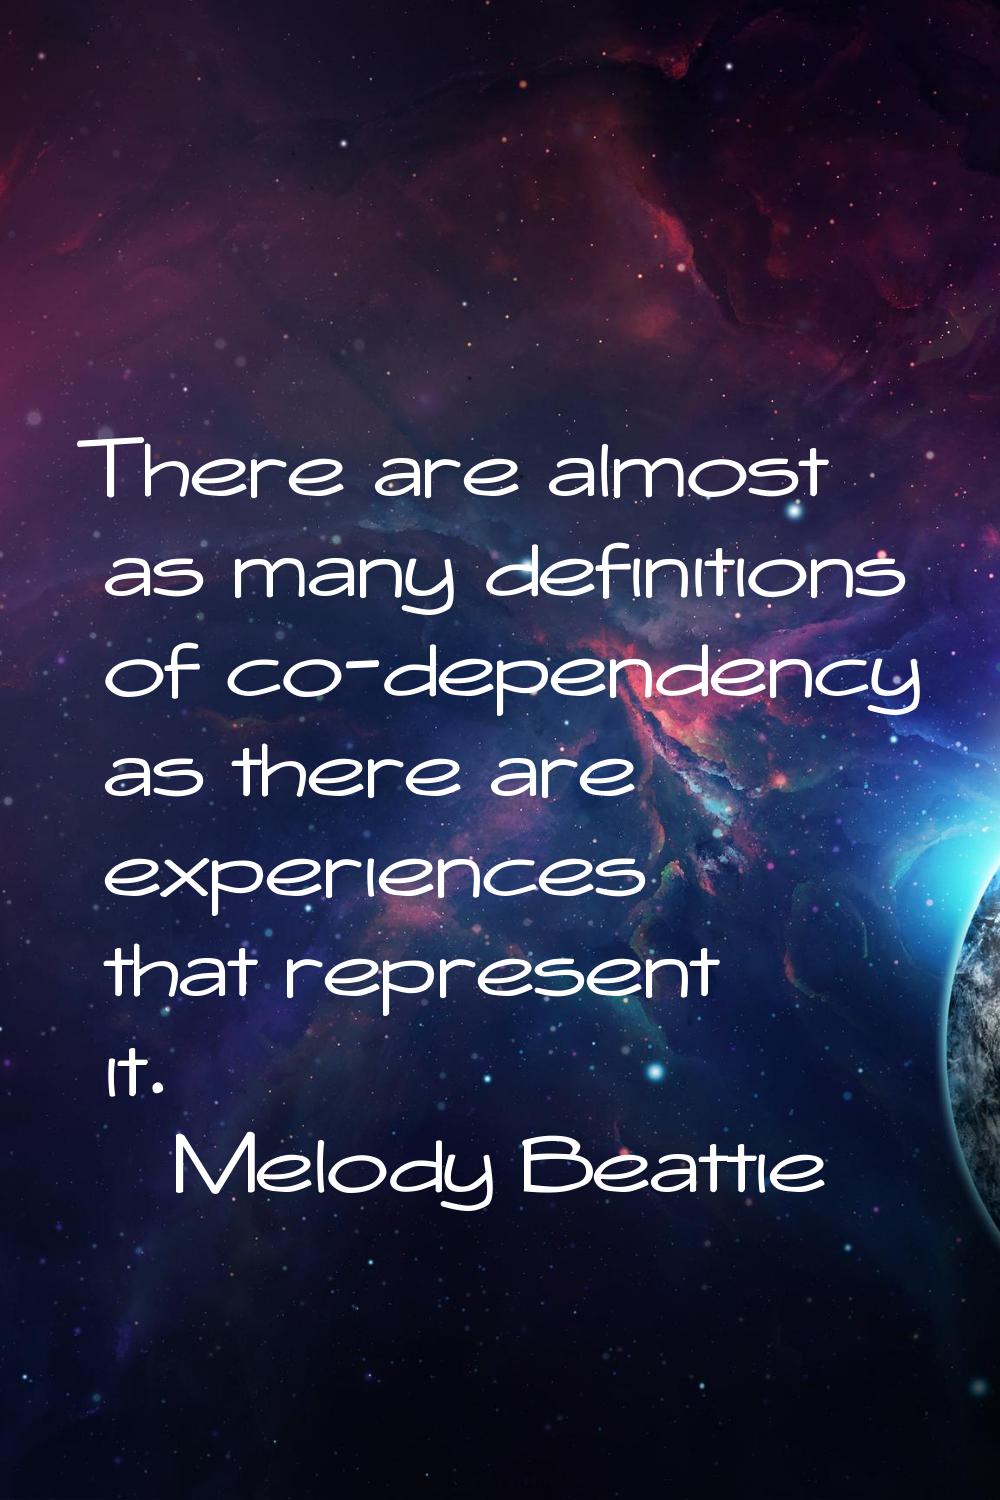 There are almost as many definitions of co-dependency as there are experiences that represent it.